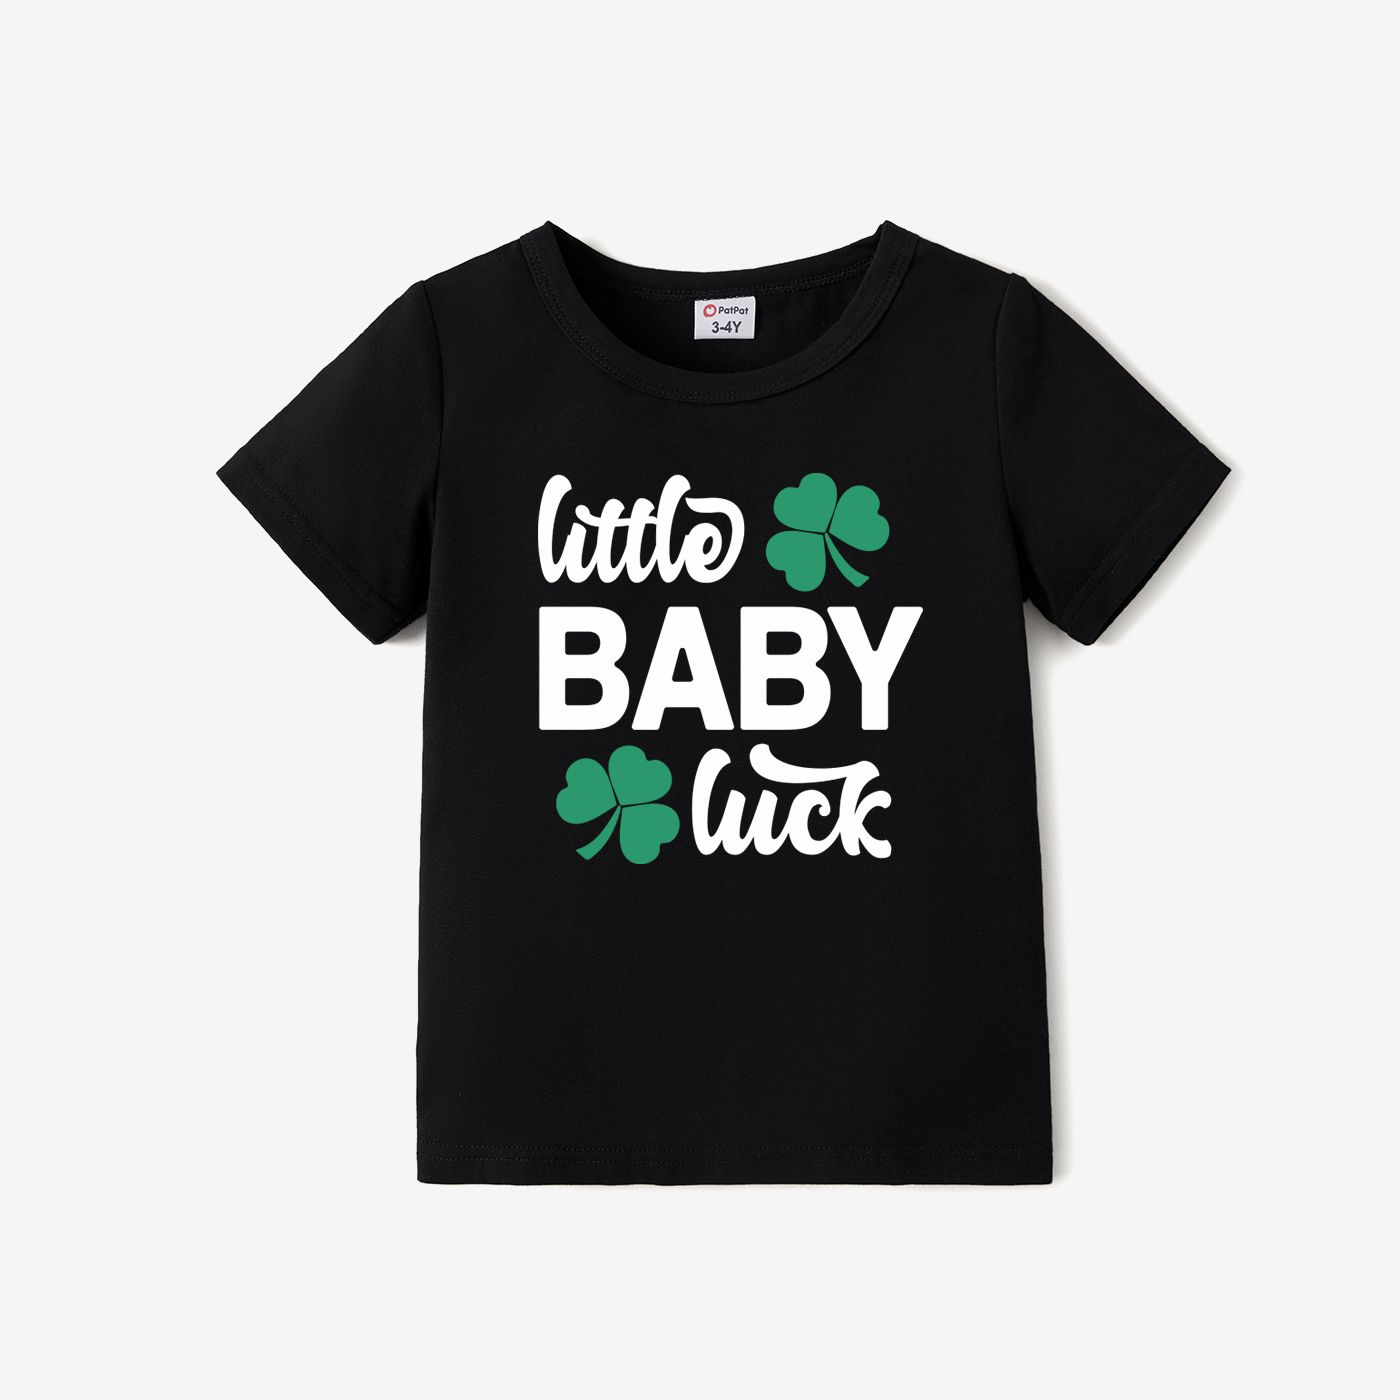 St. Patrick's Day Family Matching Lucky Four-Leaf Clover and Letter Printed Cotton Black Tops